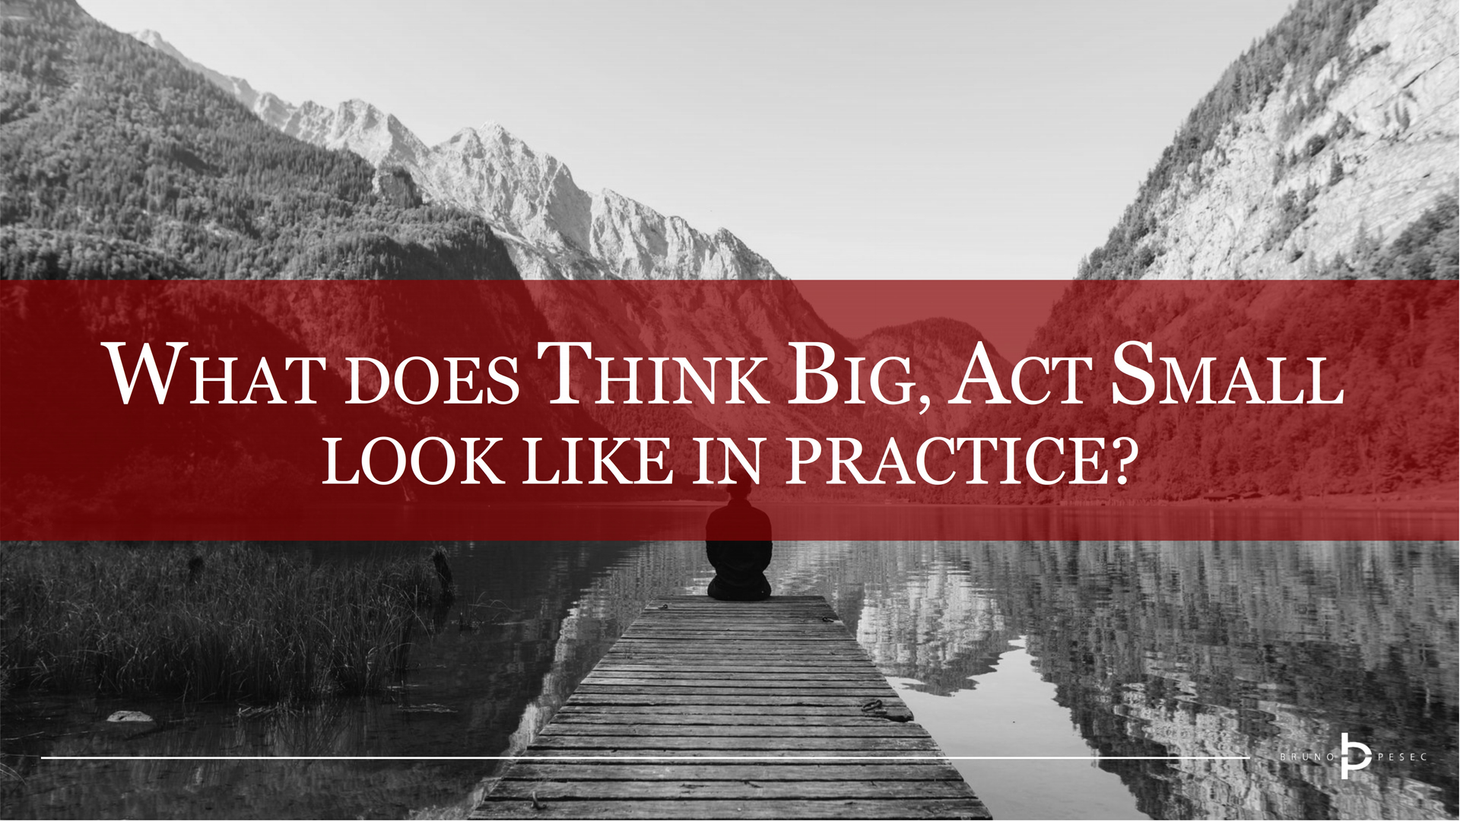 What does think big, act small look like in practice?